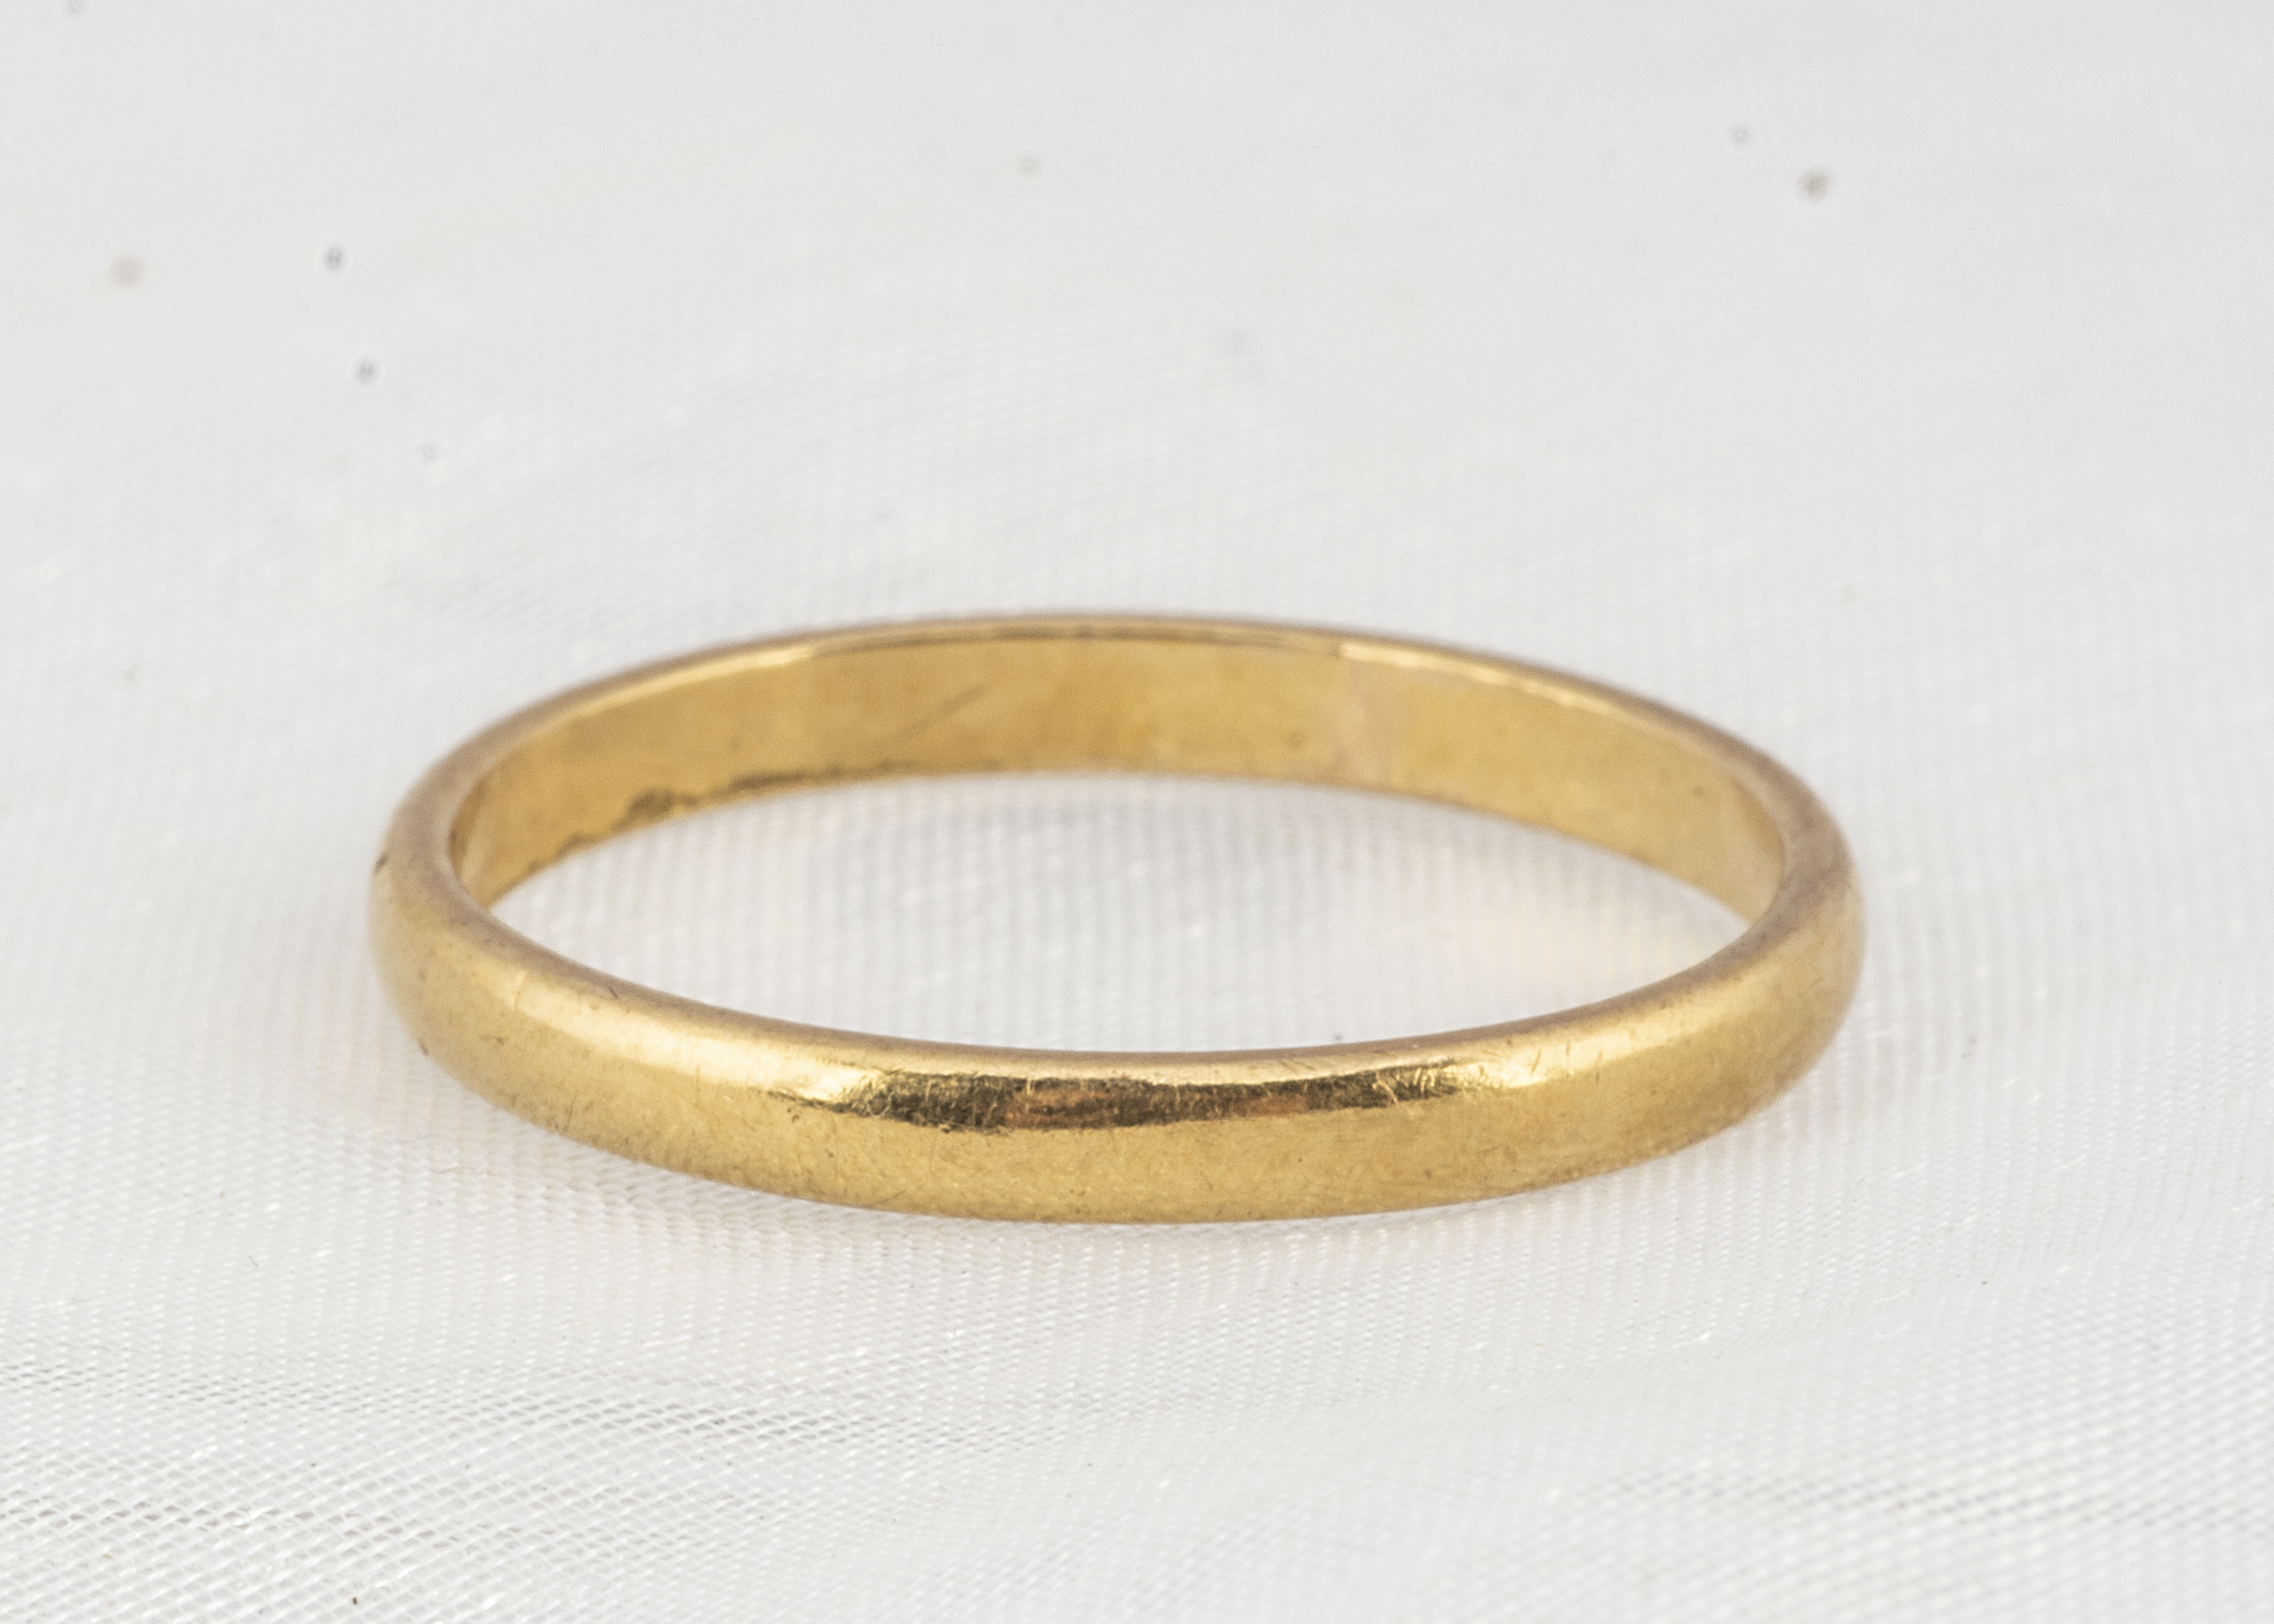 A 22ct gold wedding band, D shaped, ring size M, 2mm wide, 2.1g